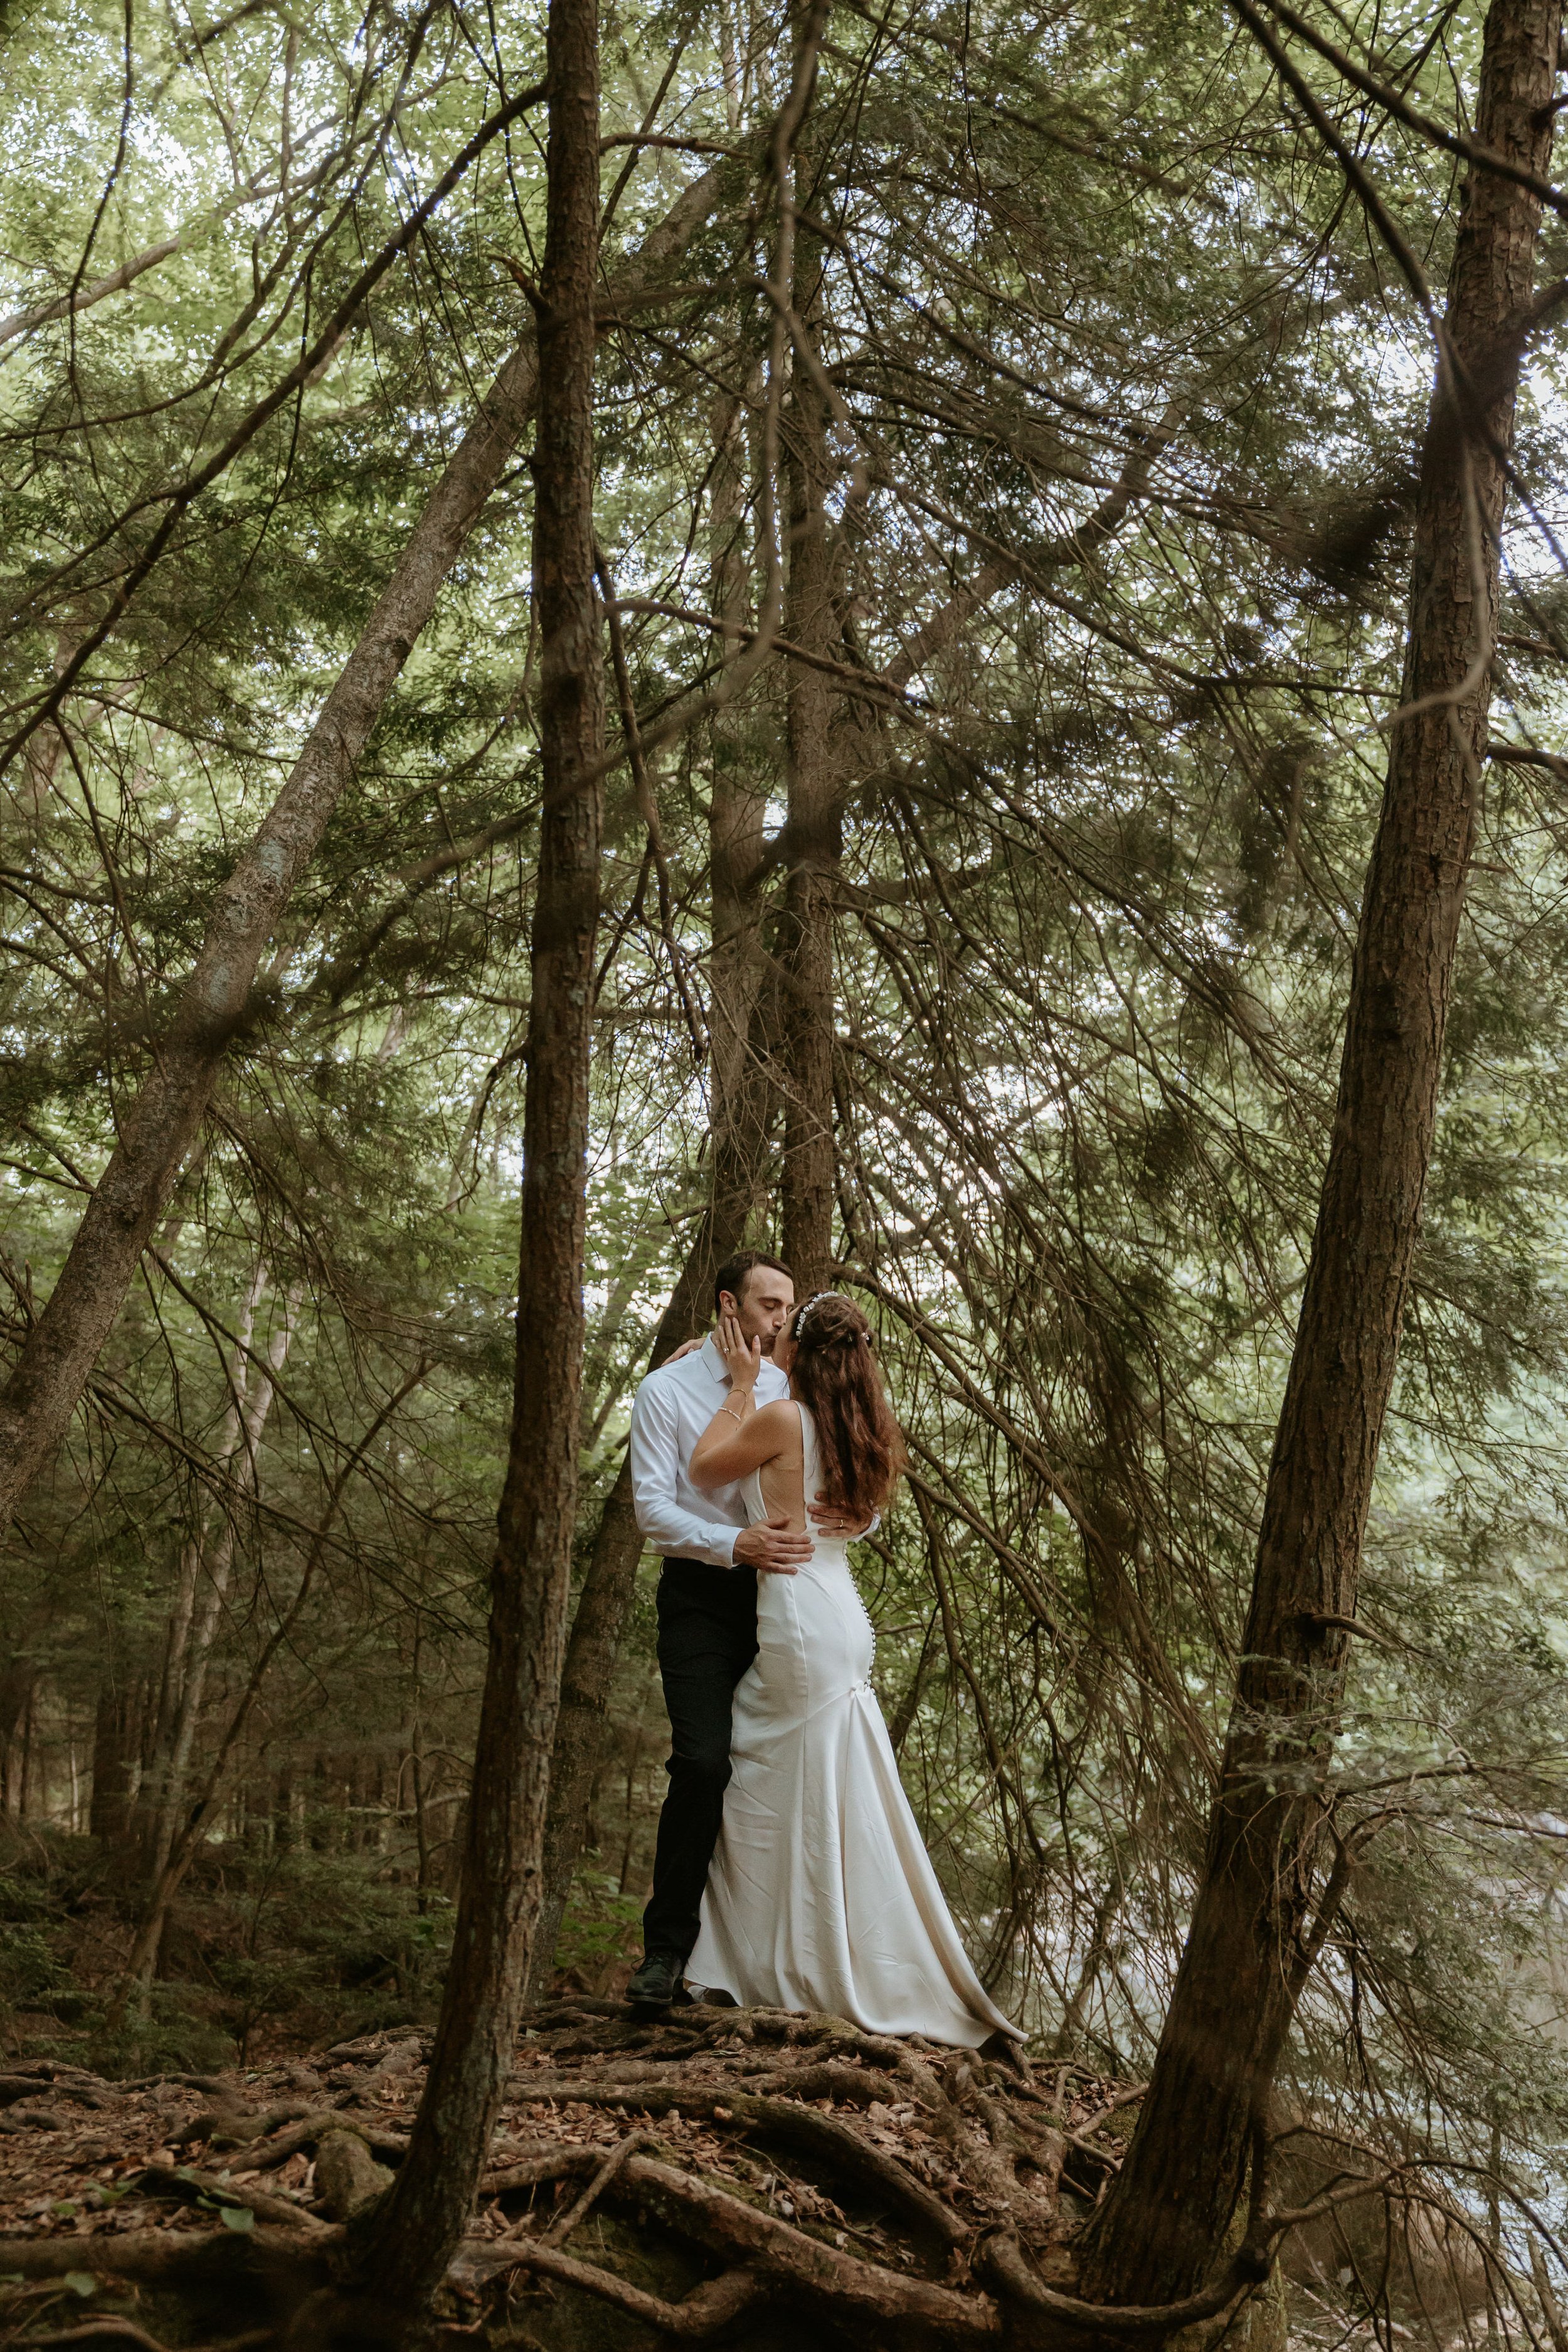 Bride and groom embrace in forest.